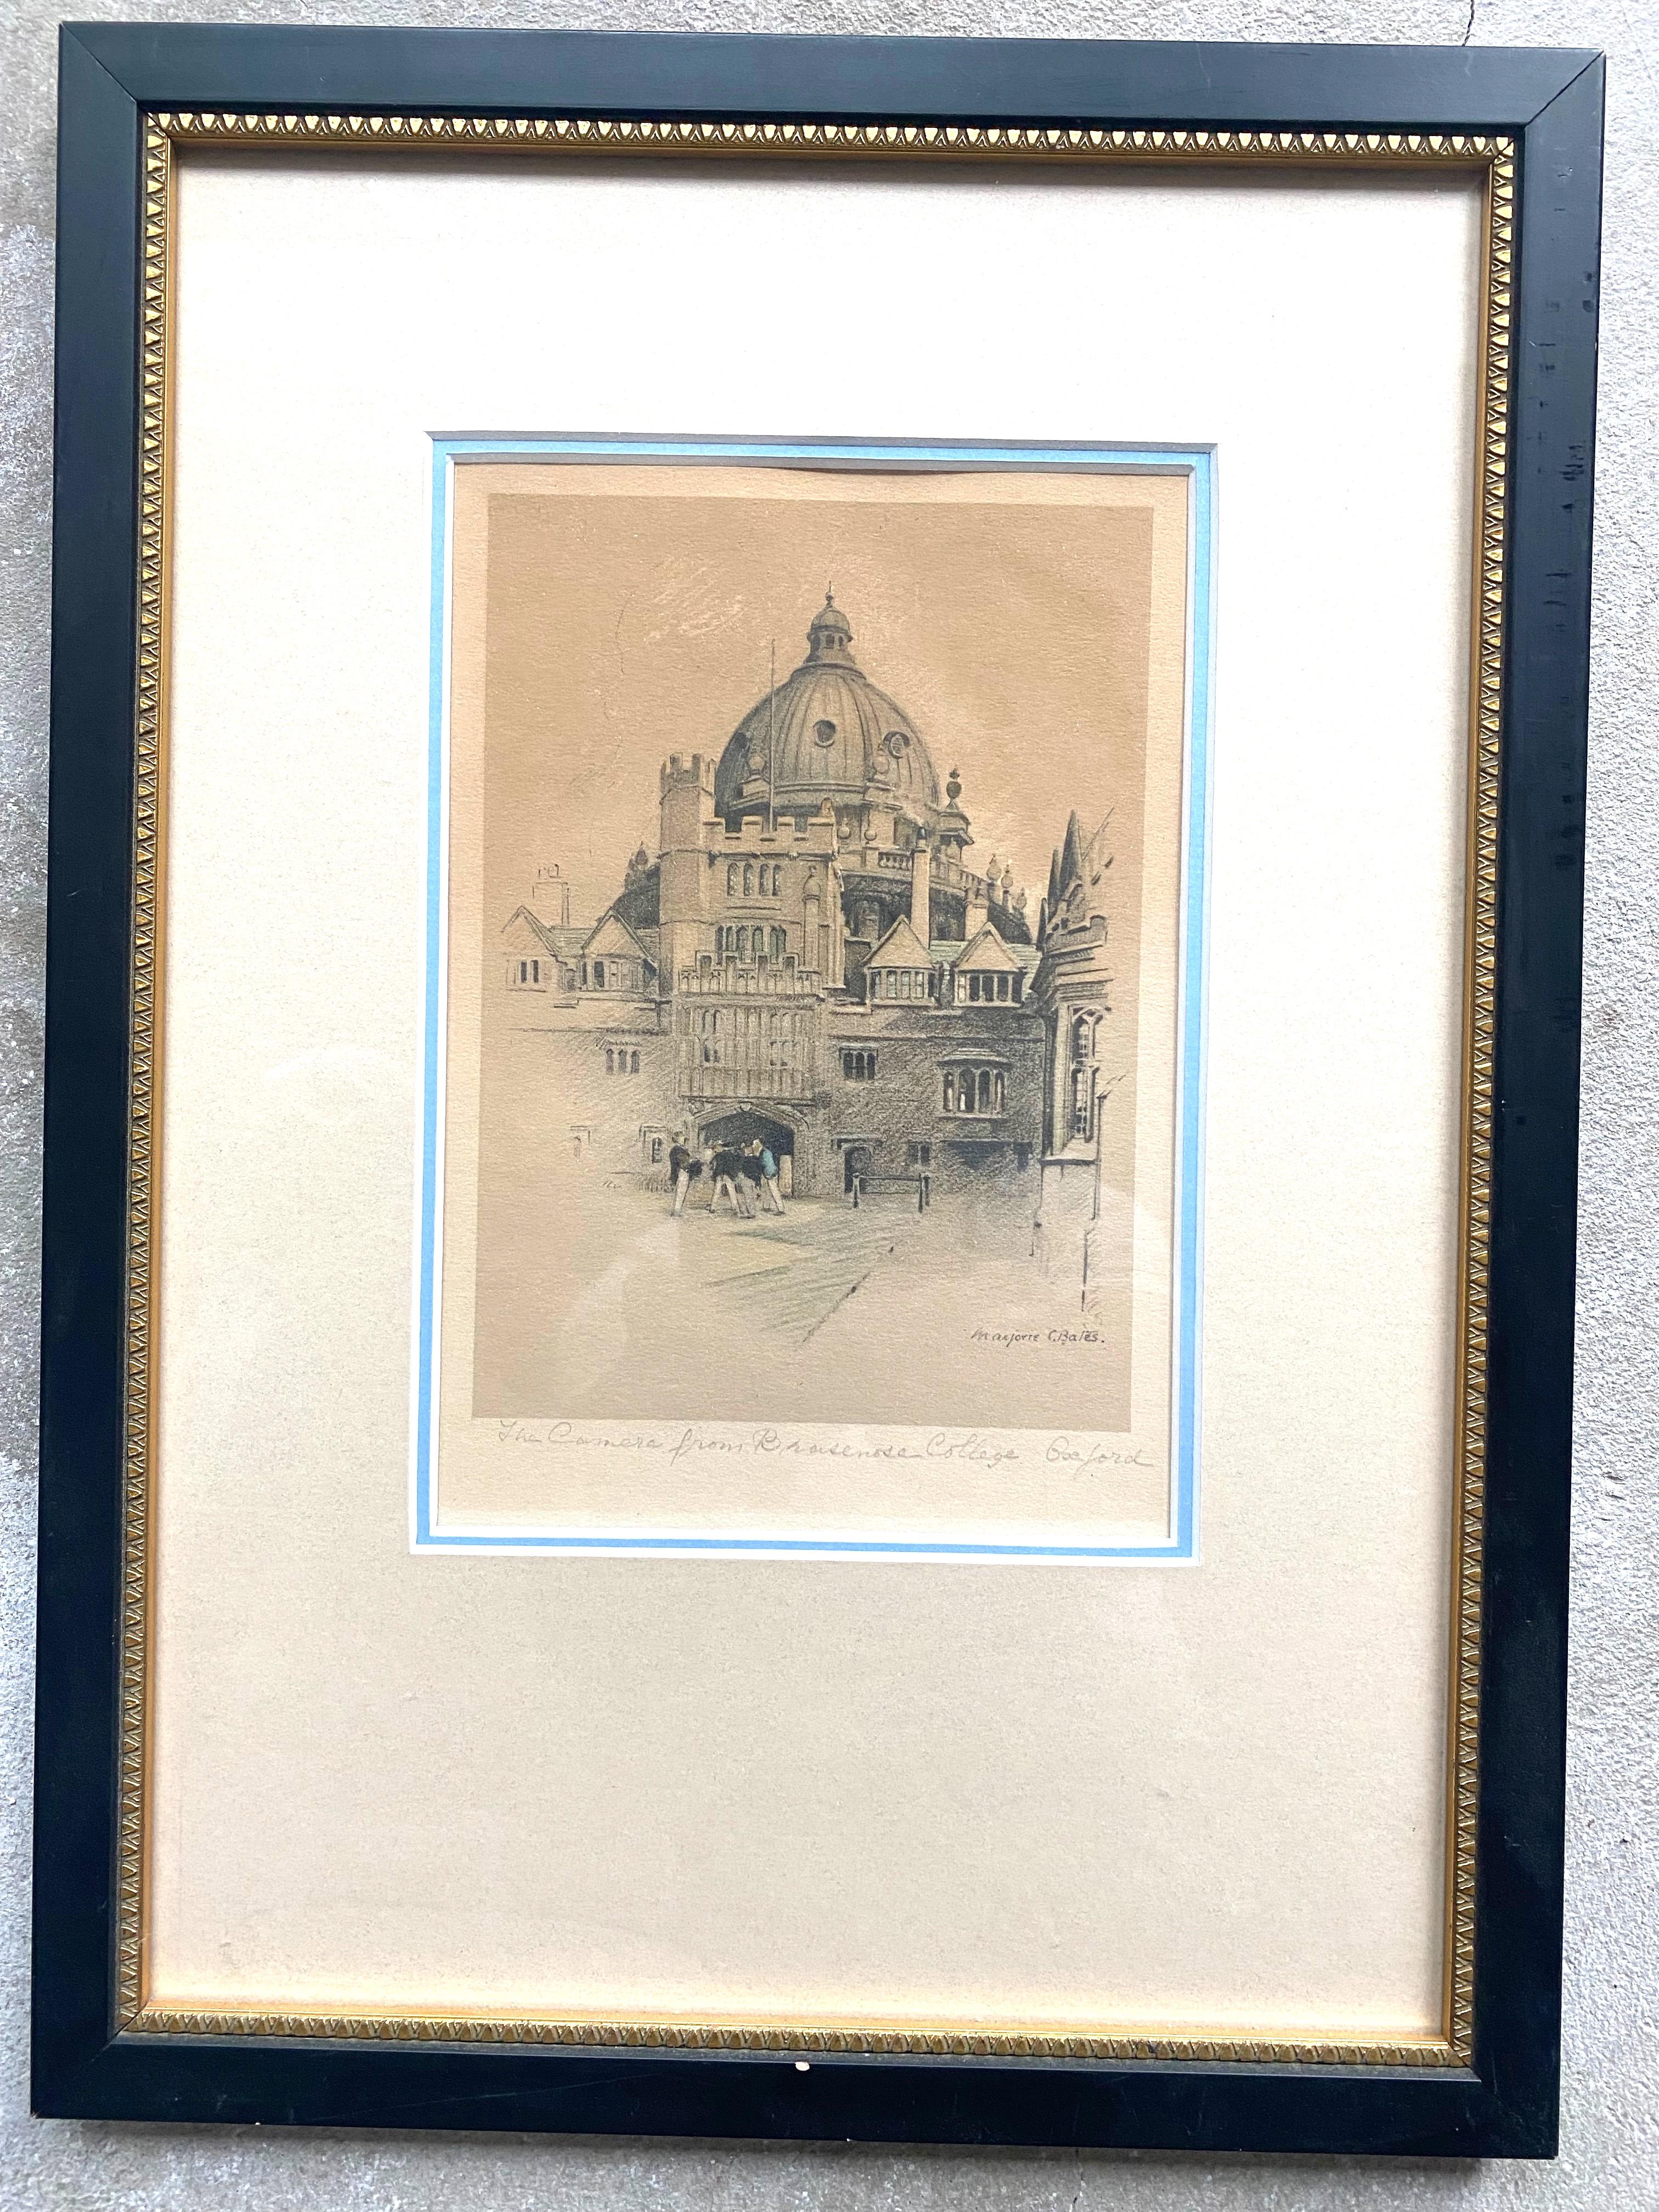  Works: Original Painting, Handmade artwork, One of a Kind
Medium: Ofort on Paper,
Year: 1900-1950,
Style: Realism, 
Subject: Cityscape,
Size: 8